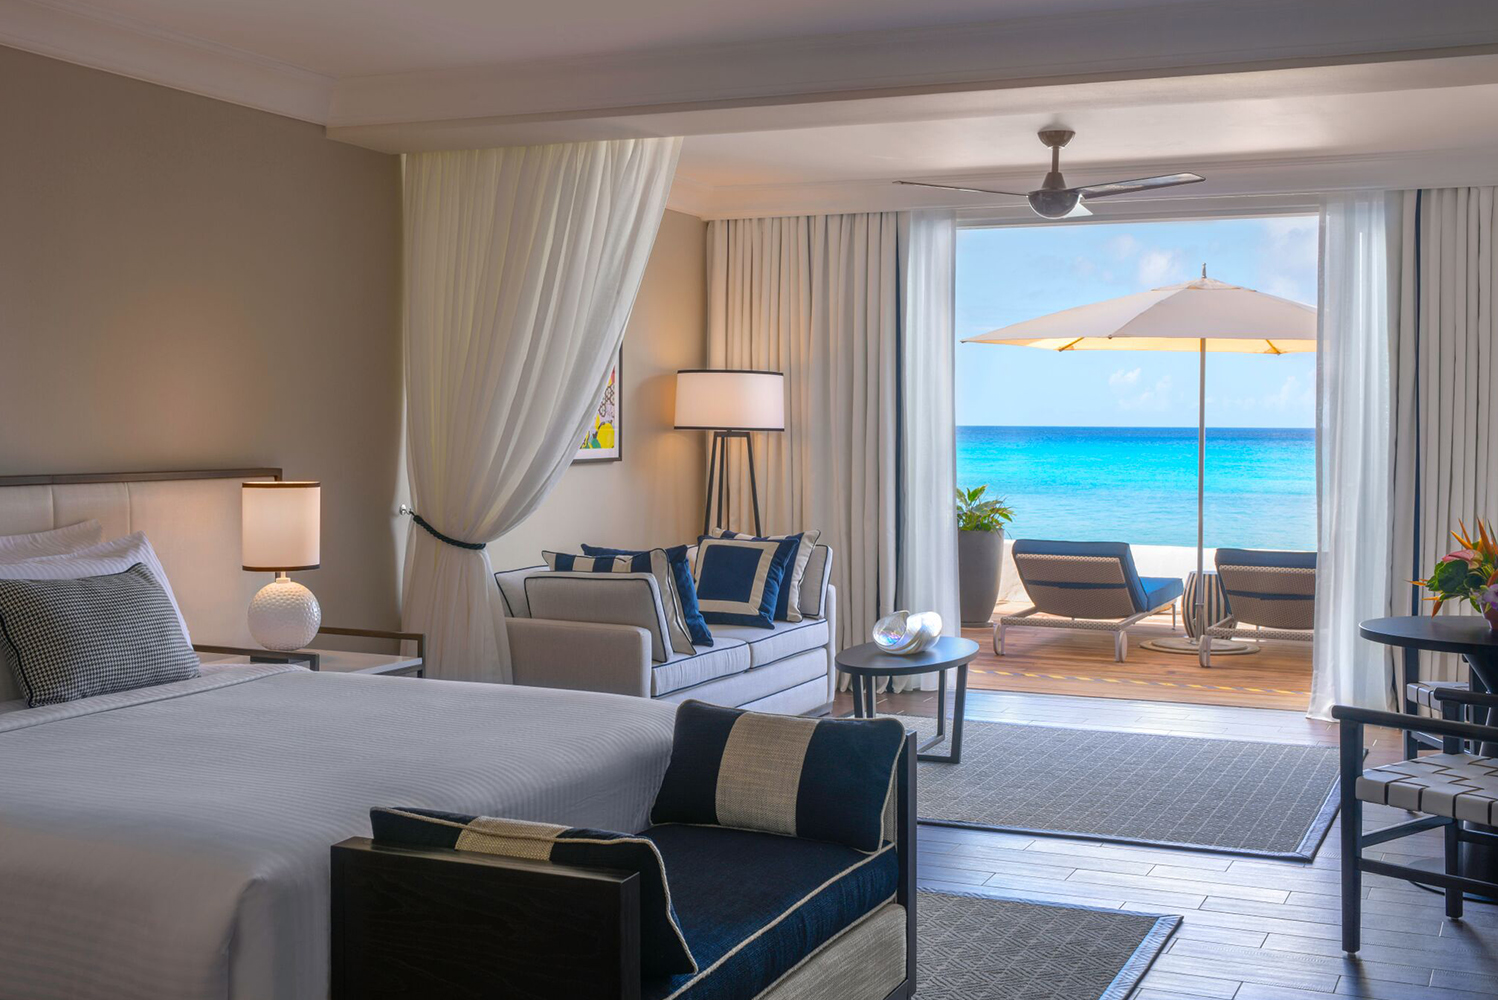 Fairmont Royal Pavilion Barbados completed a renovation project that saw changes made to the propertys hotel lobby and 7